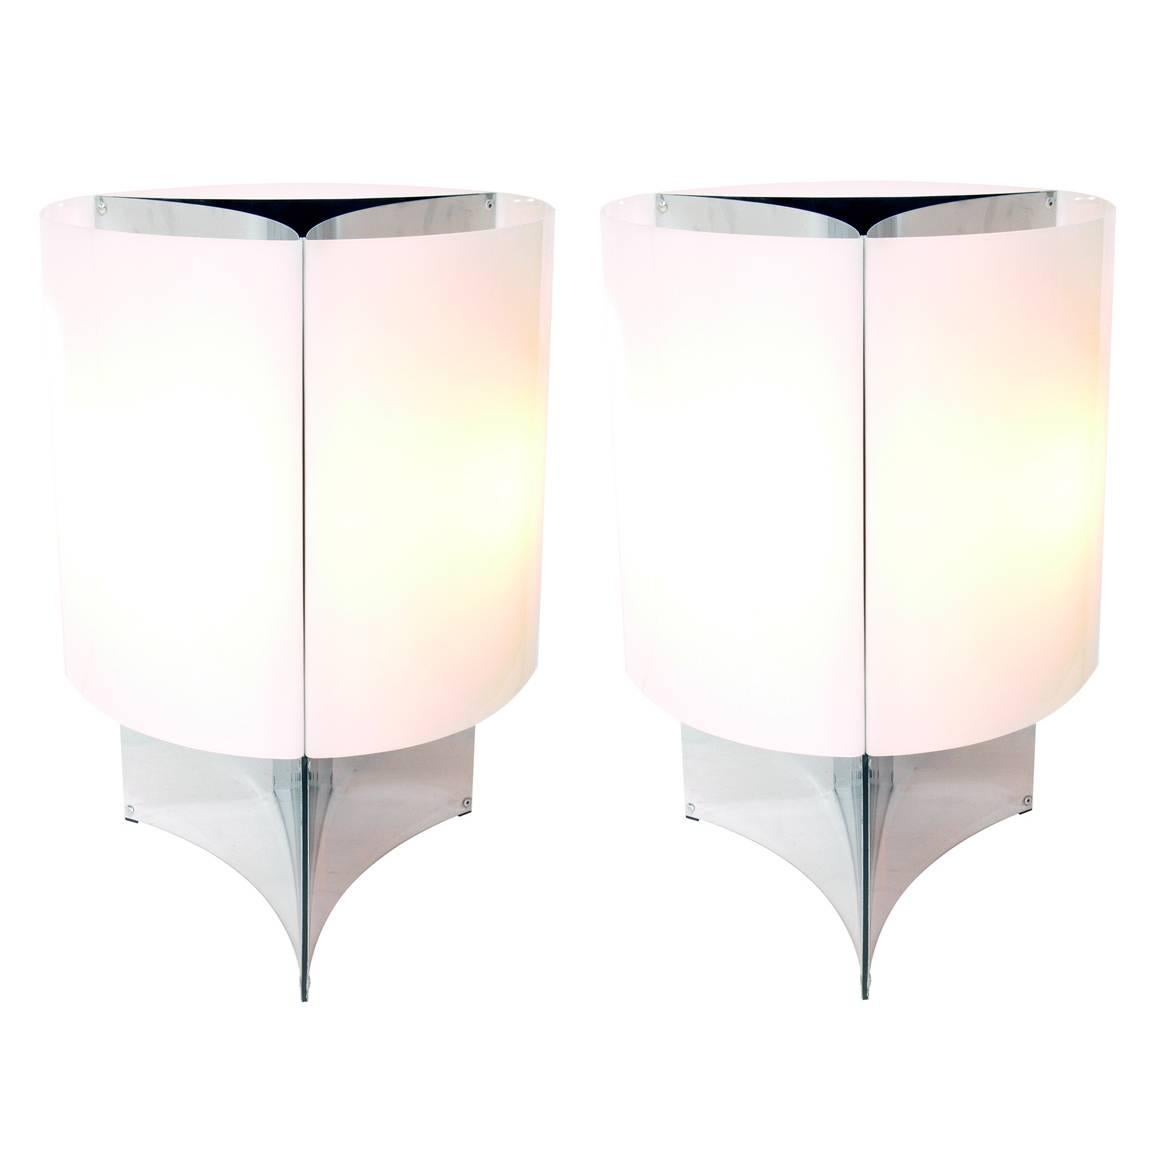 Pair of Large Scale Lamps by Massimo Vignelli for Arteluce